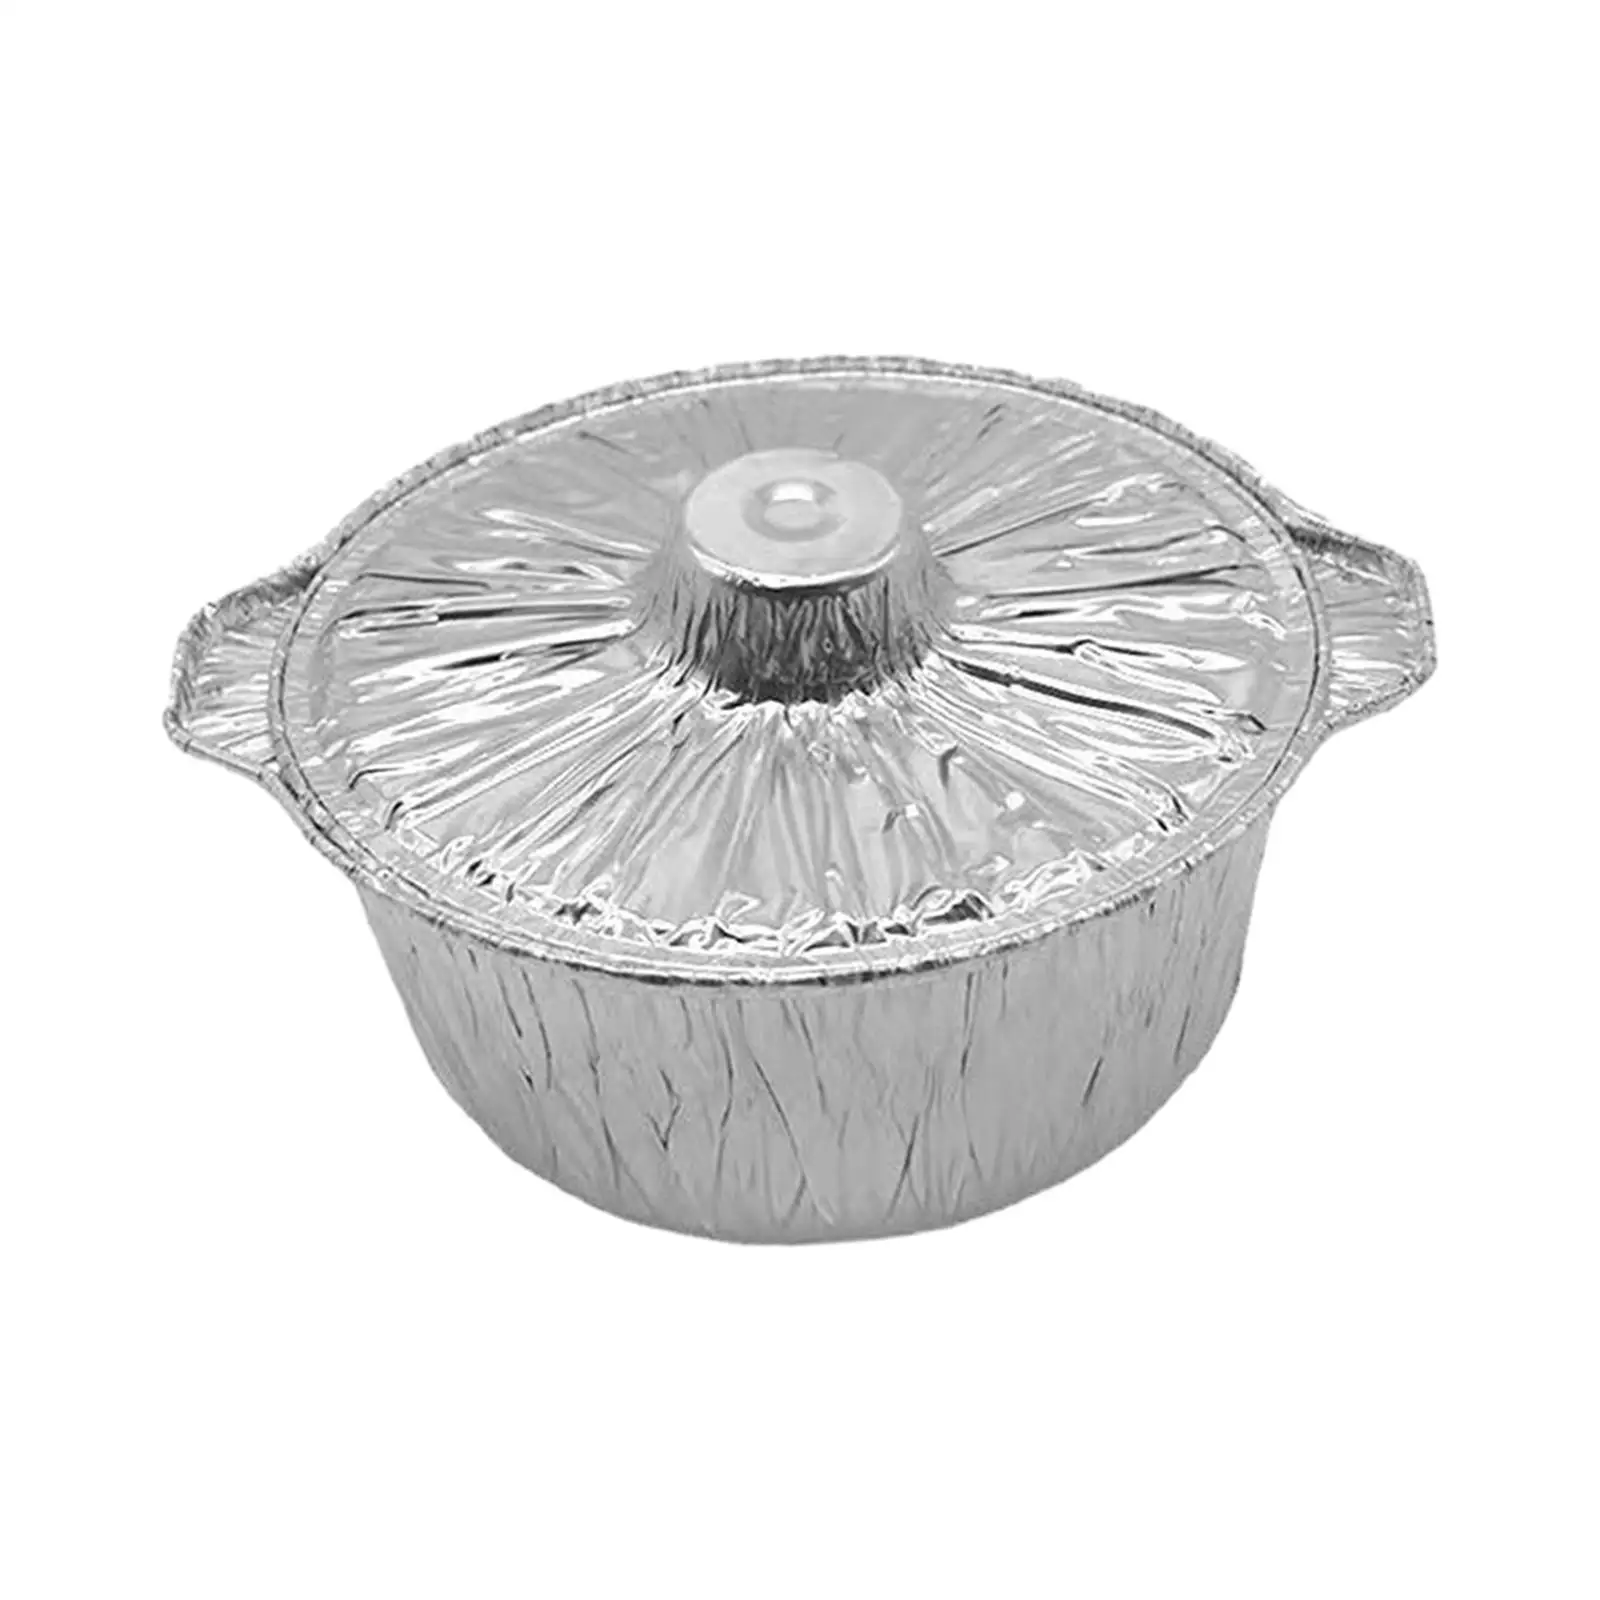 Baking Tin Pot Meat Pot Hotpot Bakeware Cake Pan Tin Foil Pot Cooking Pot for Barbecue, Kitchen, Take Out, Events, Broiling